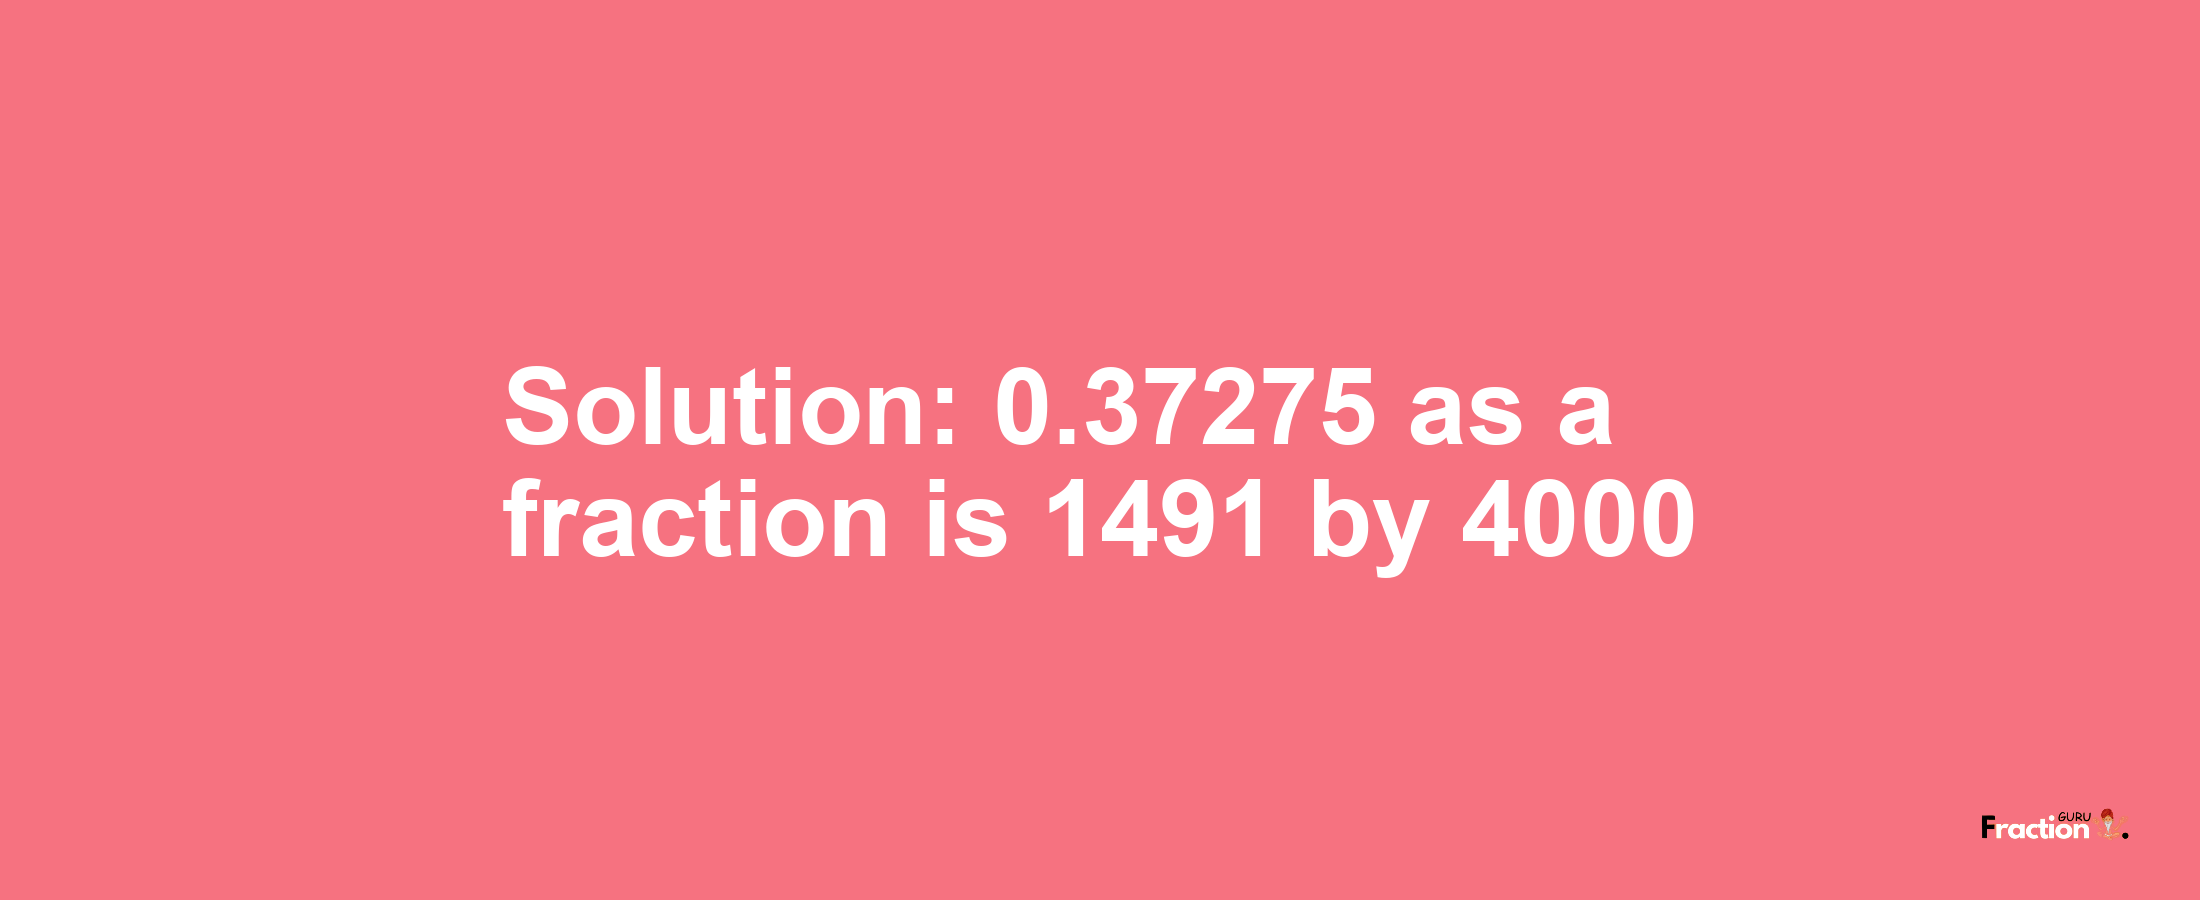 Solution:0.37275 as a fraction is 1491/4000